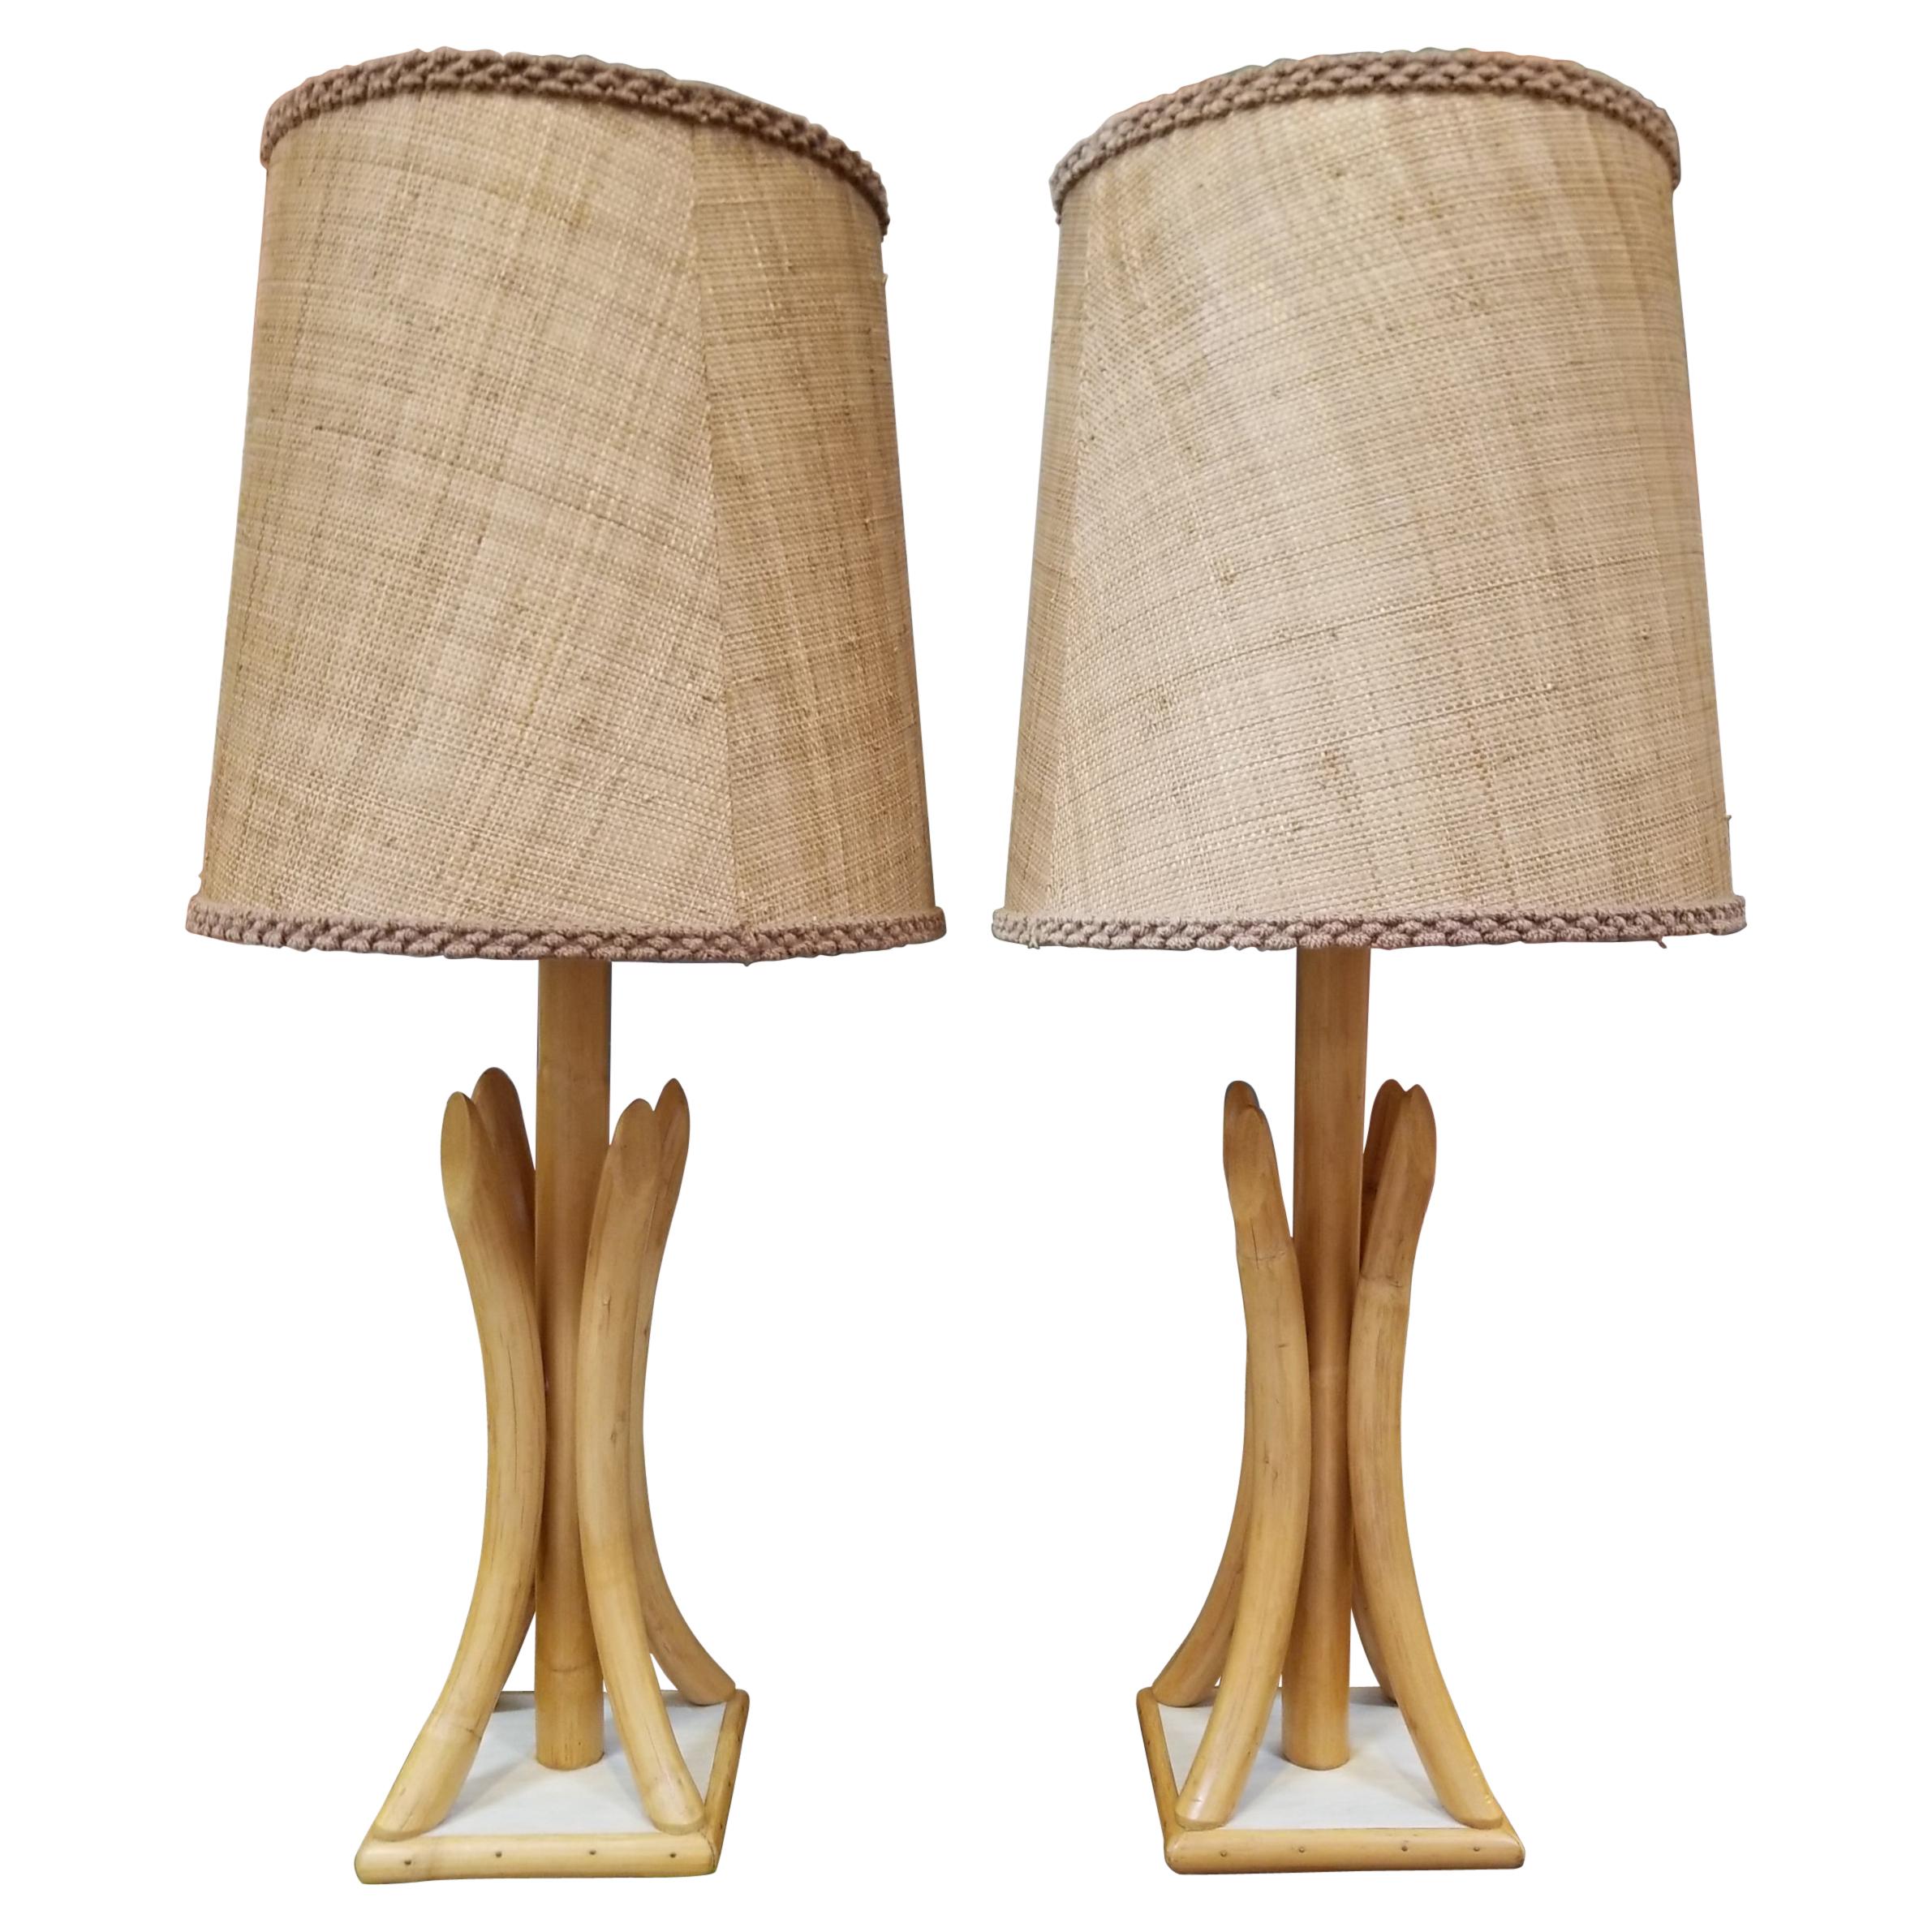 1950 S Bamboo Rattan Table Lamps For, Vintage Lamp Shades For Table Lamps